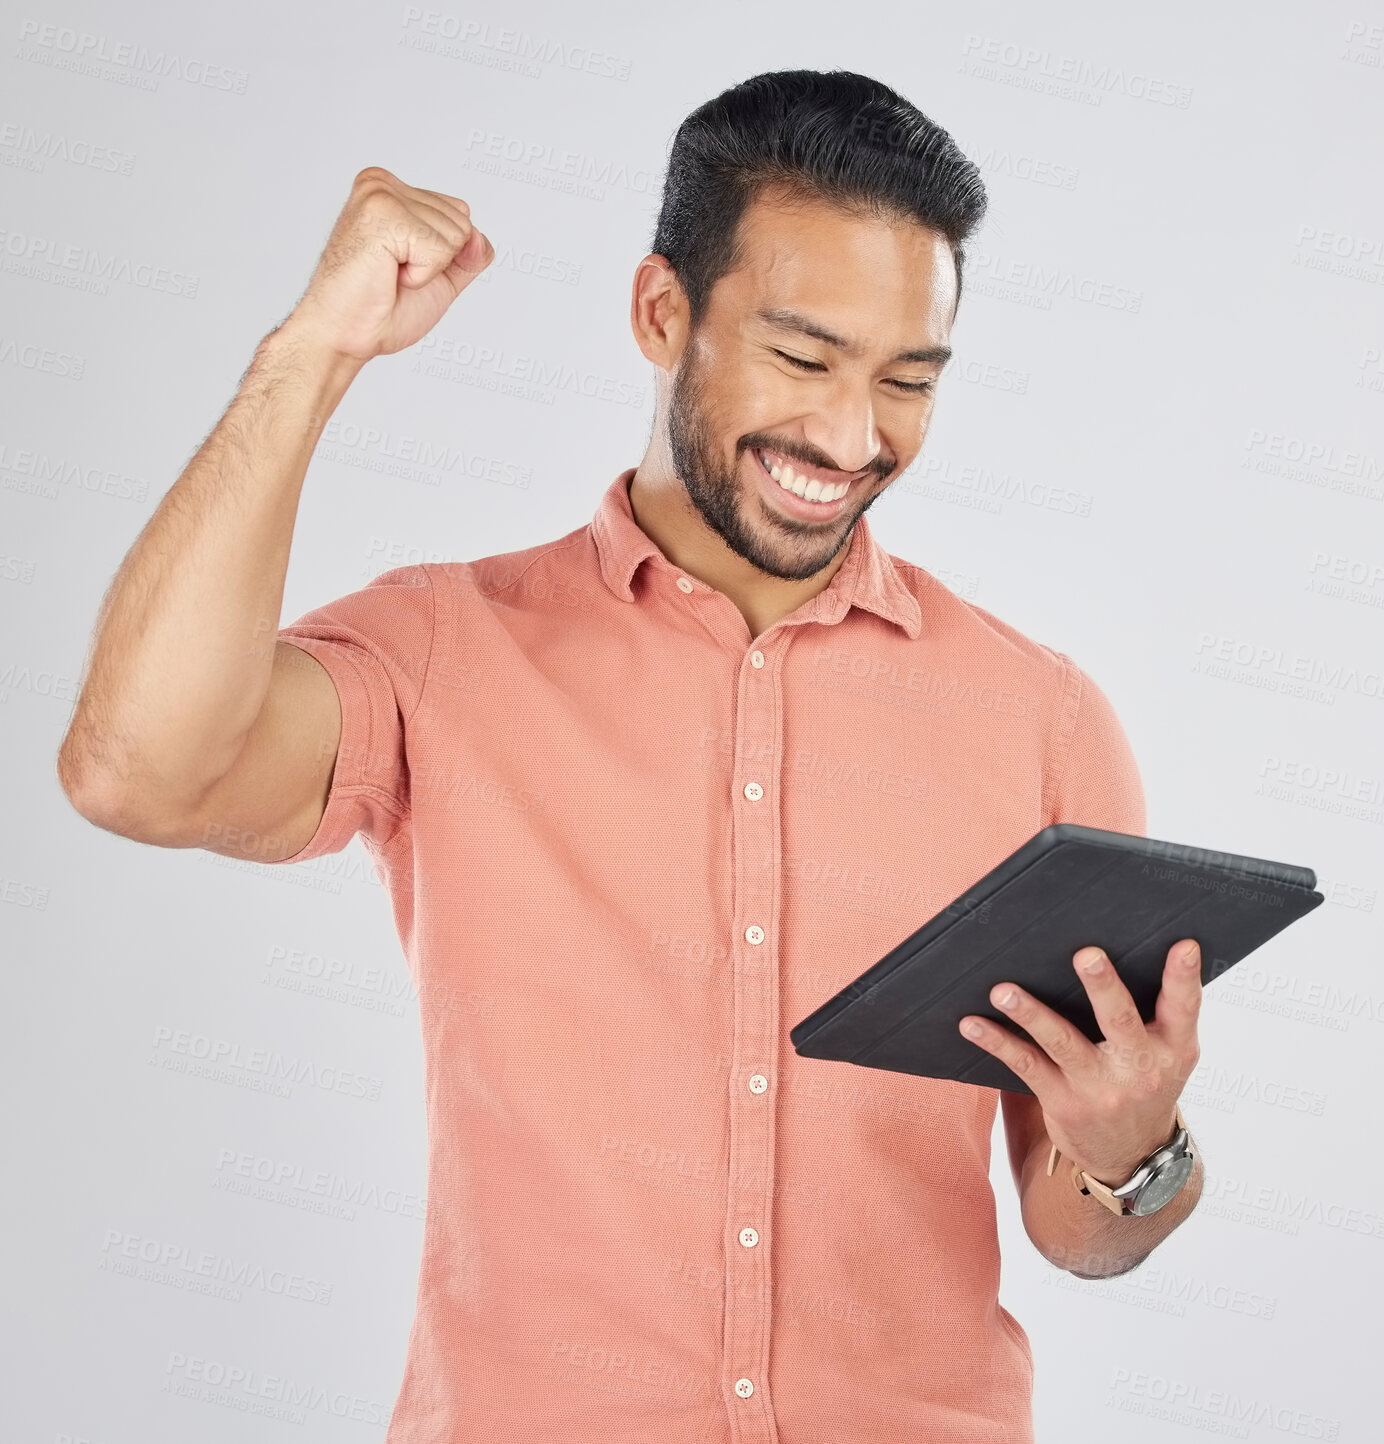 Buy stock photo Happy asian man, tablet and fist pump in winning, celebration or promotion against a white studio background. Excited male person with technology app in happiness for victory, success or good news